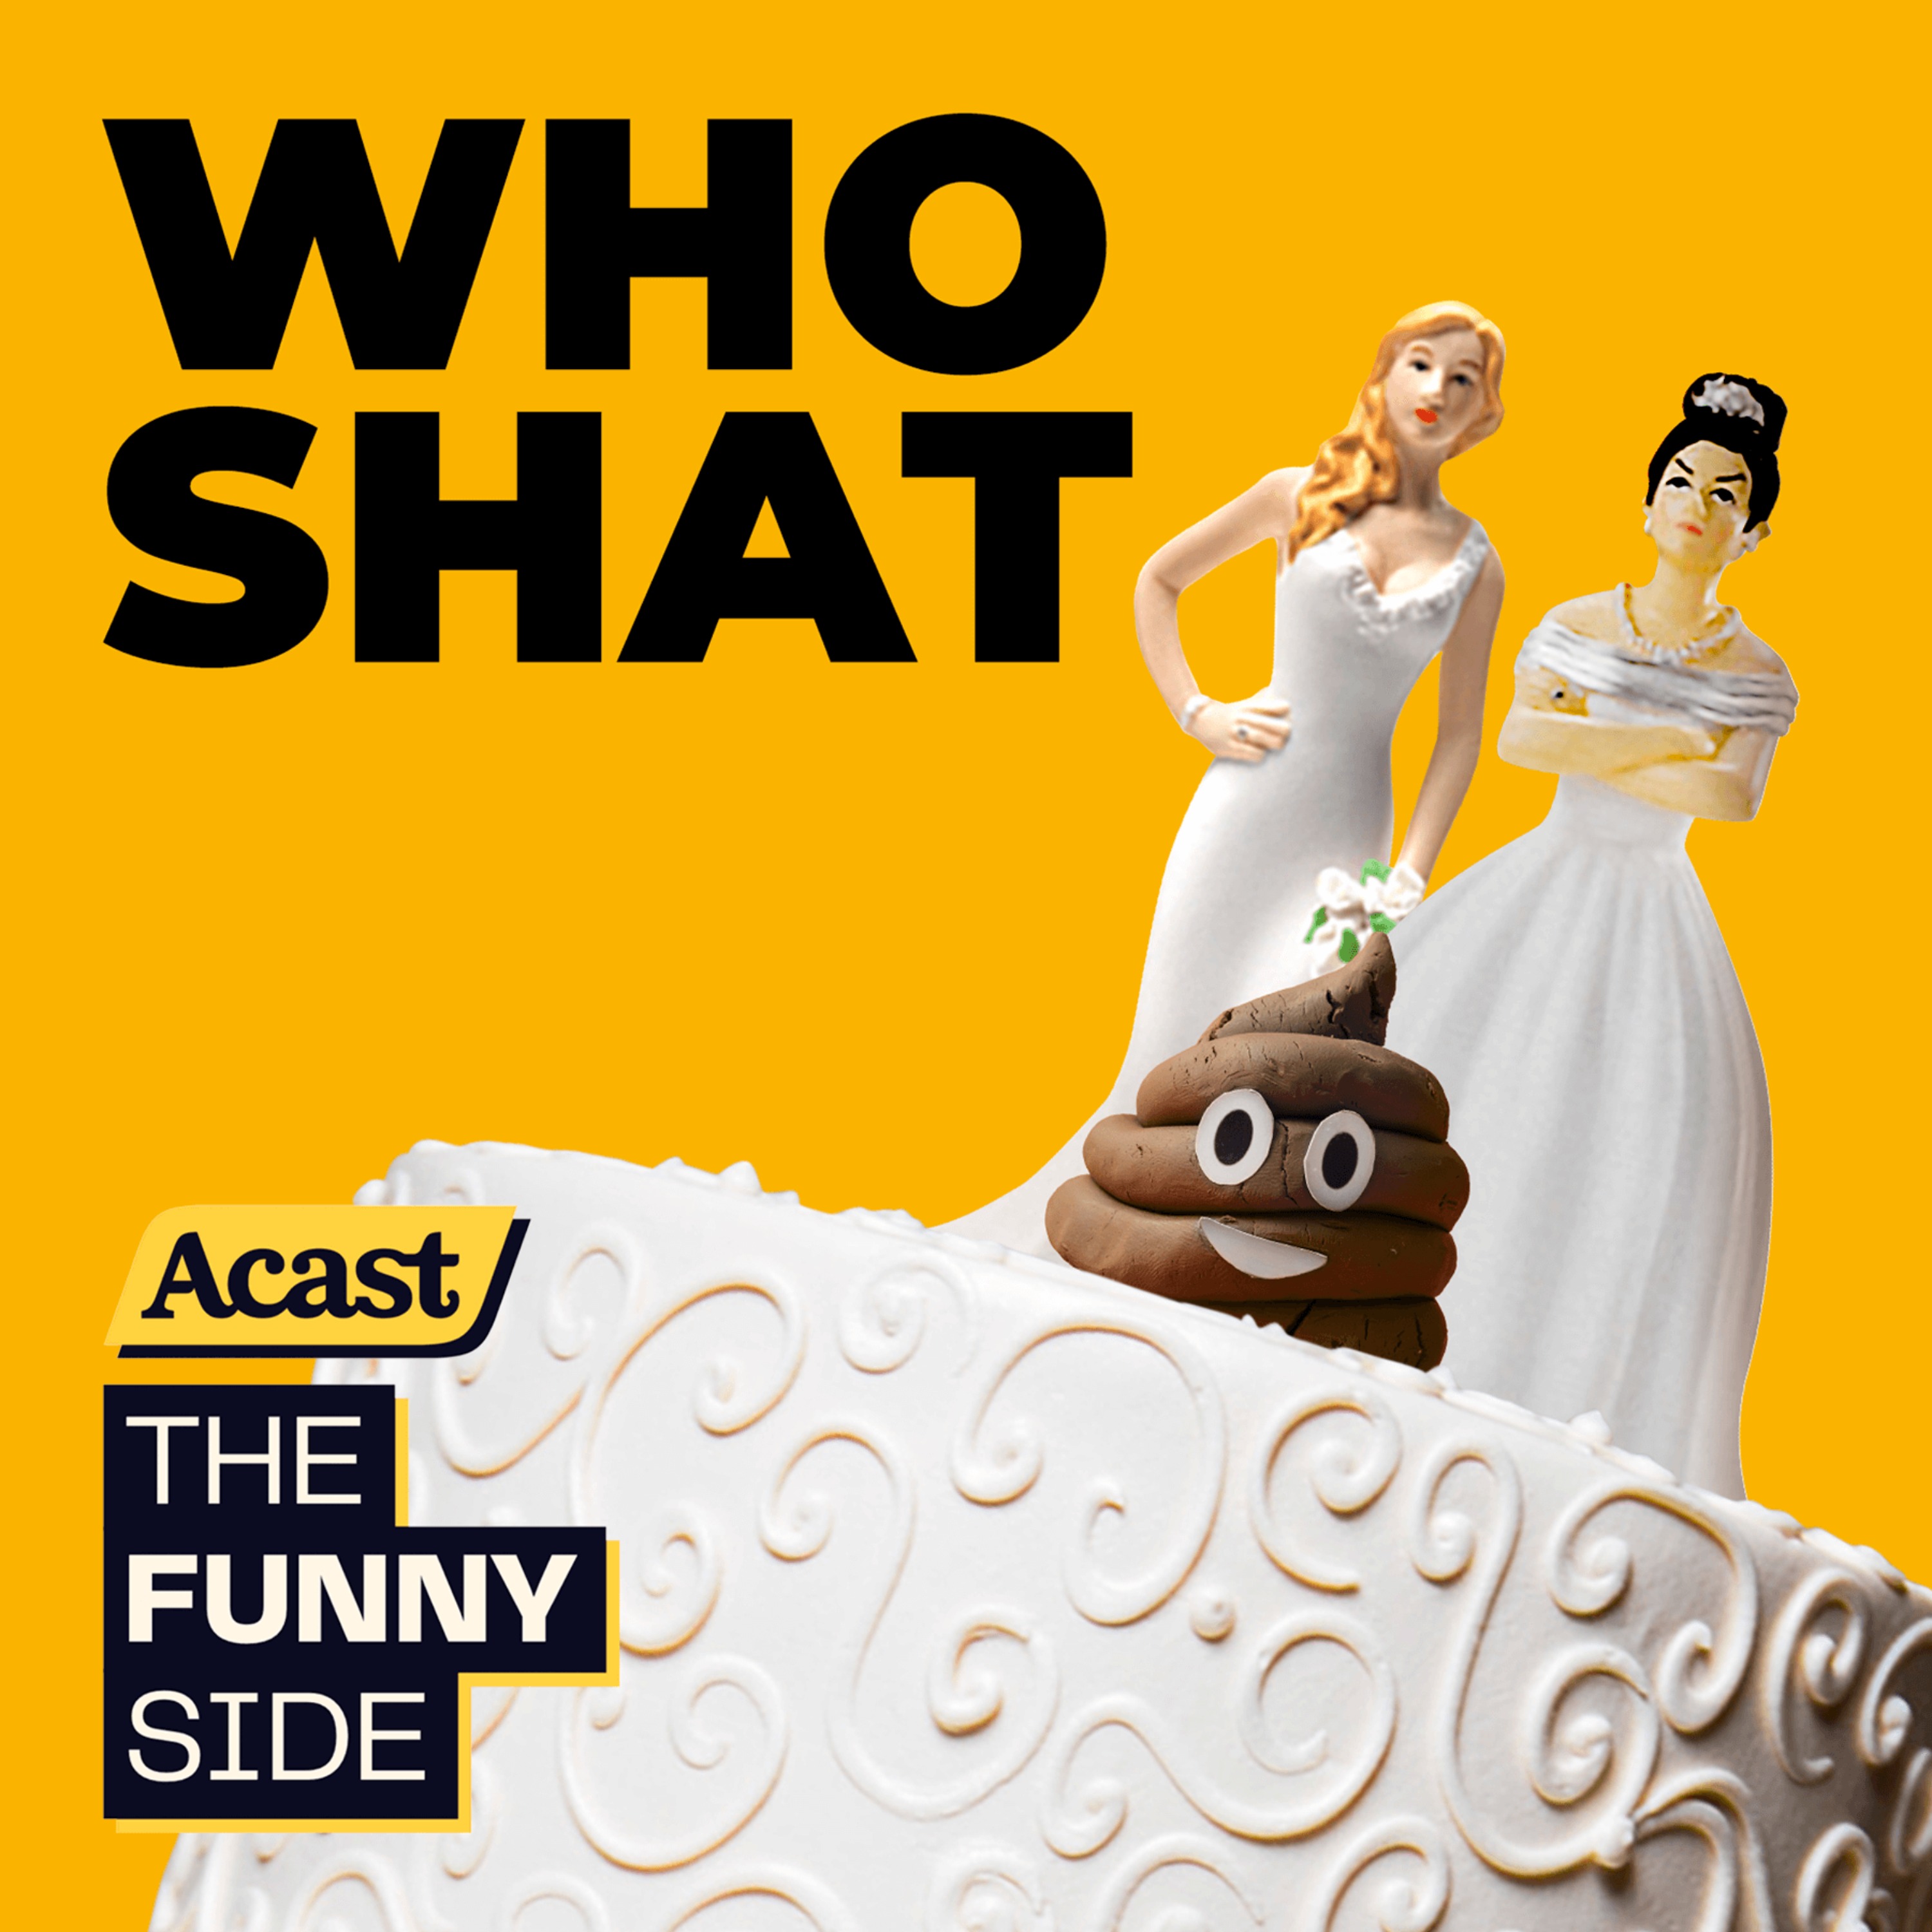 Who shat on the floor at my wedding? podcast show image